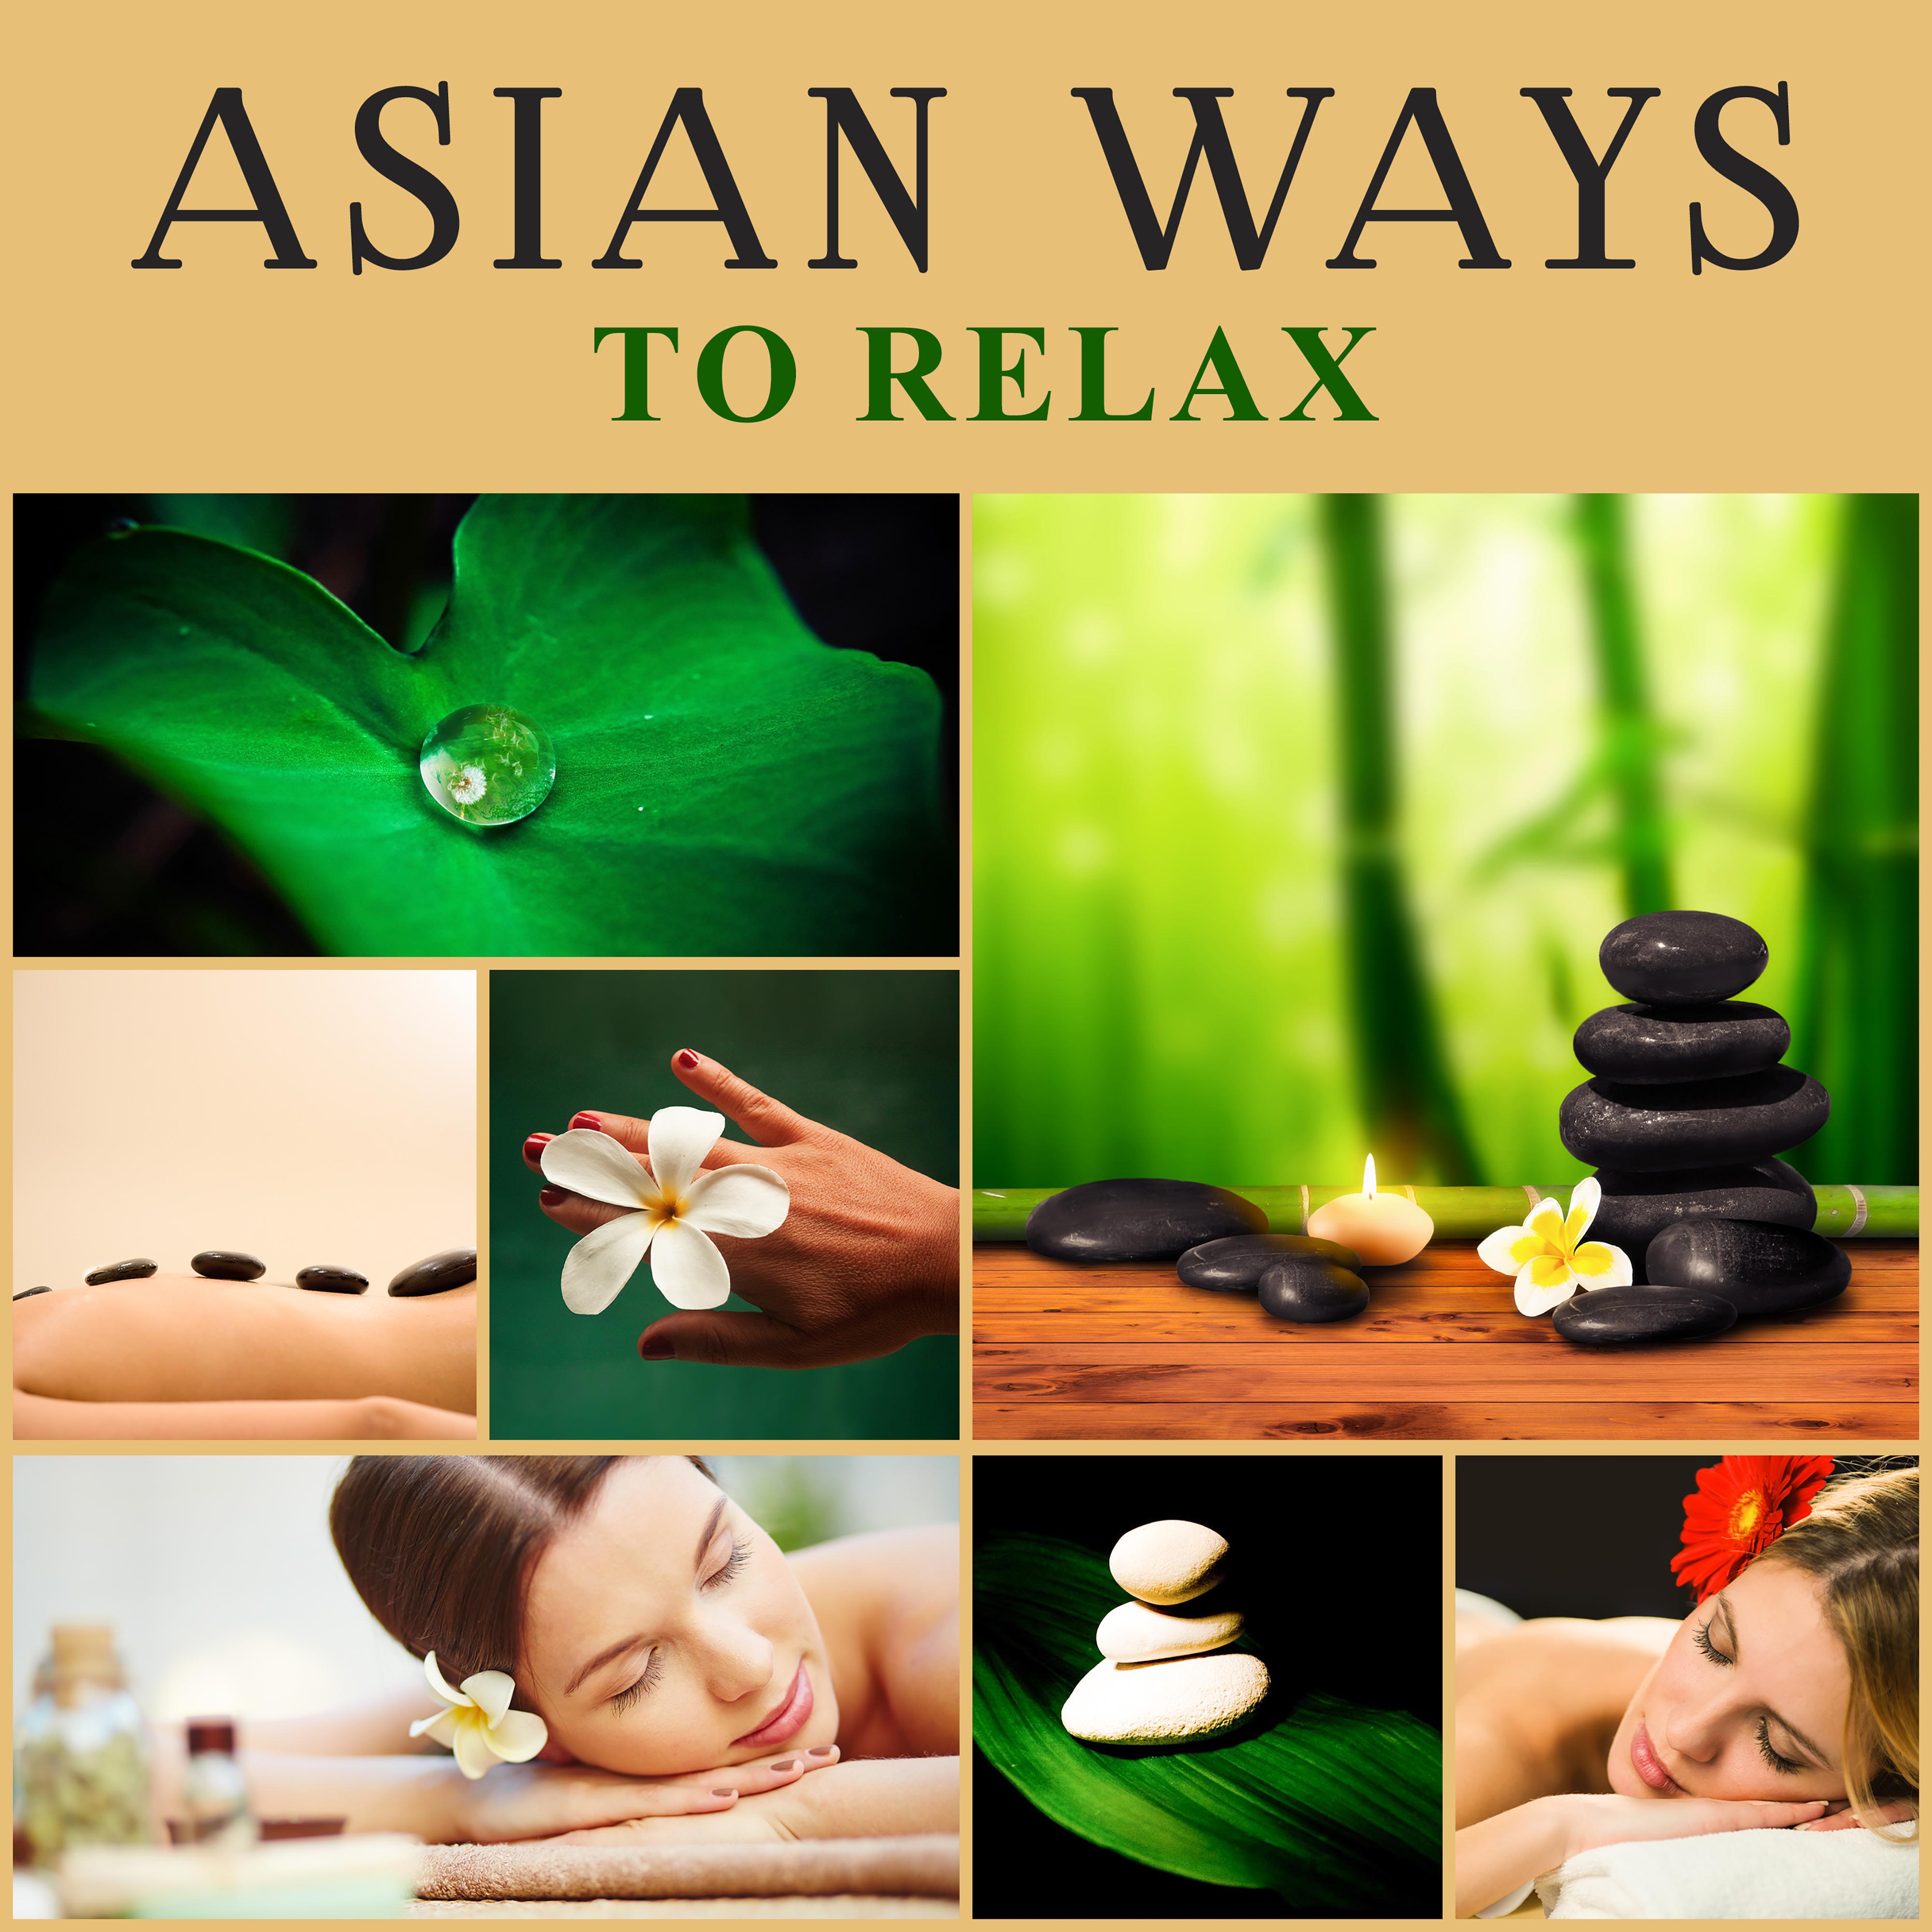 Asian Ways to Relax - Ritual Spa Home Treatments, Mud and Cosmetology, Massage Stones, Body Peeling, Hydration and Refresh